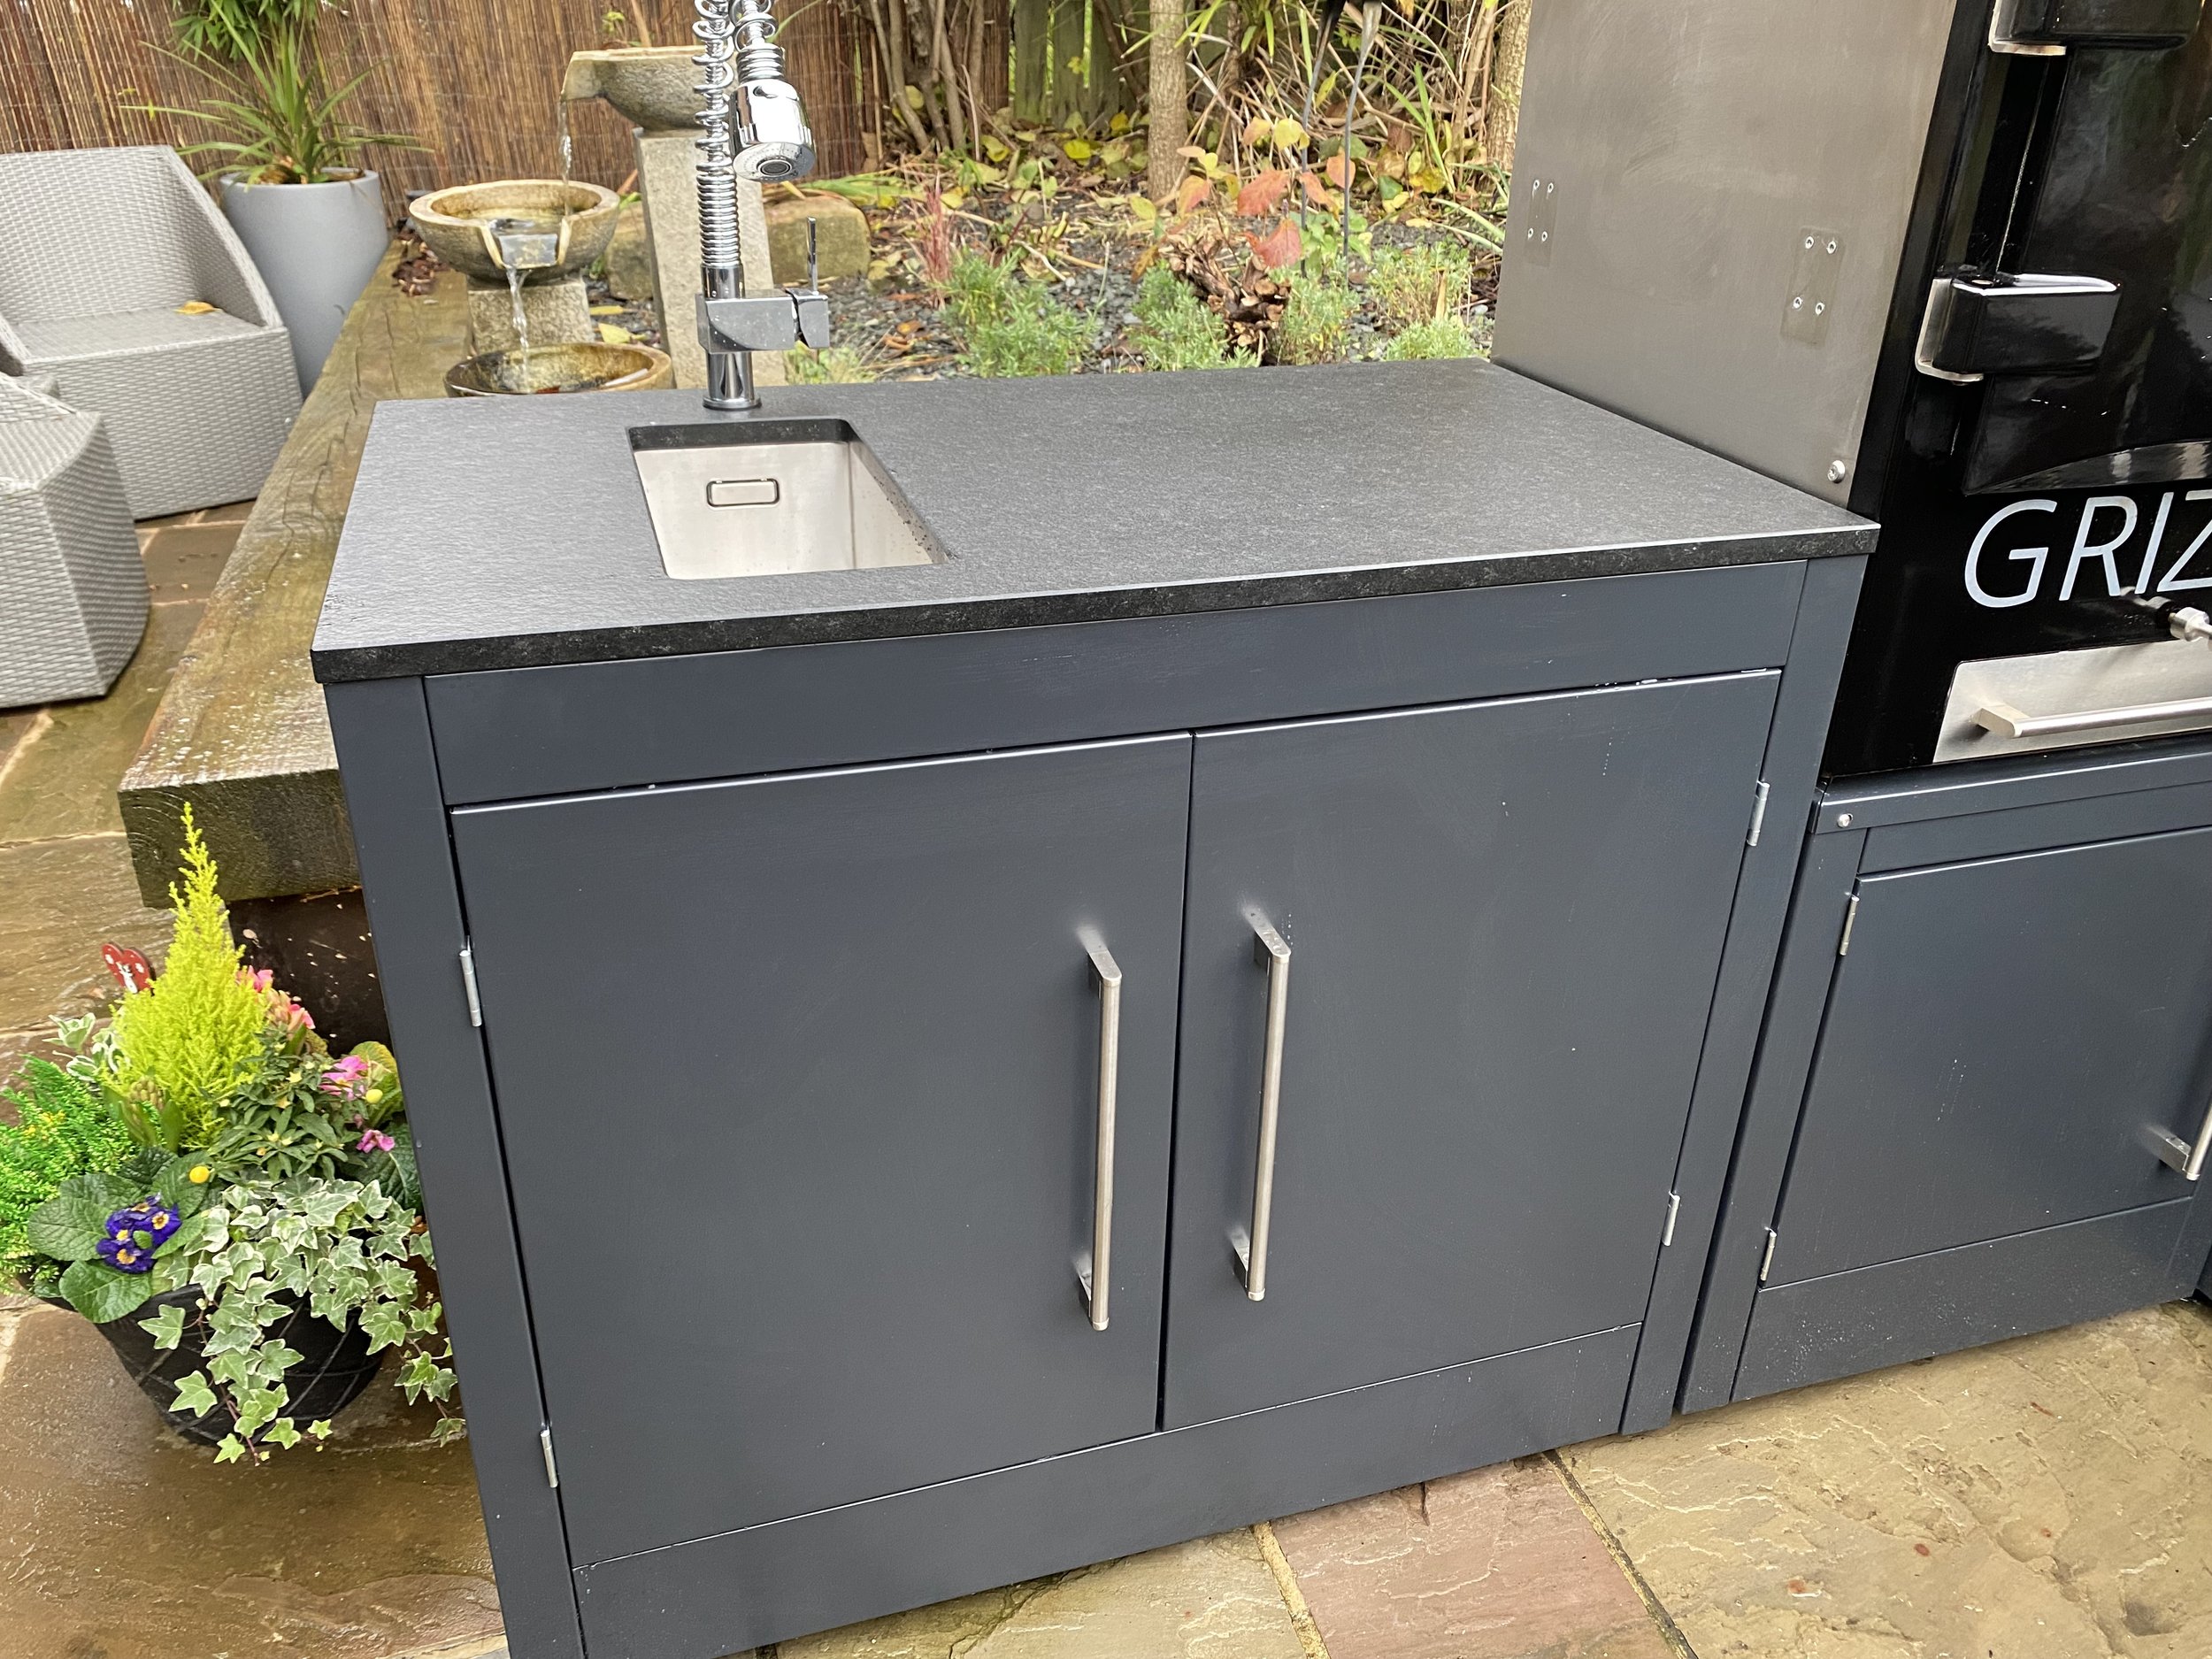 Outdoor Kitchen Sink Unit Grizzly Oven